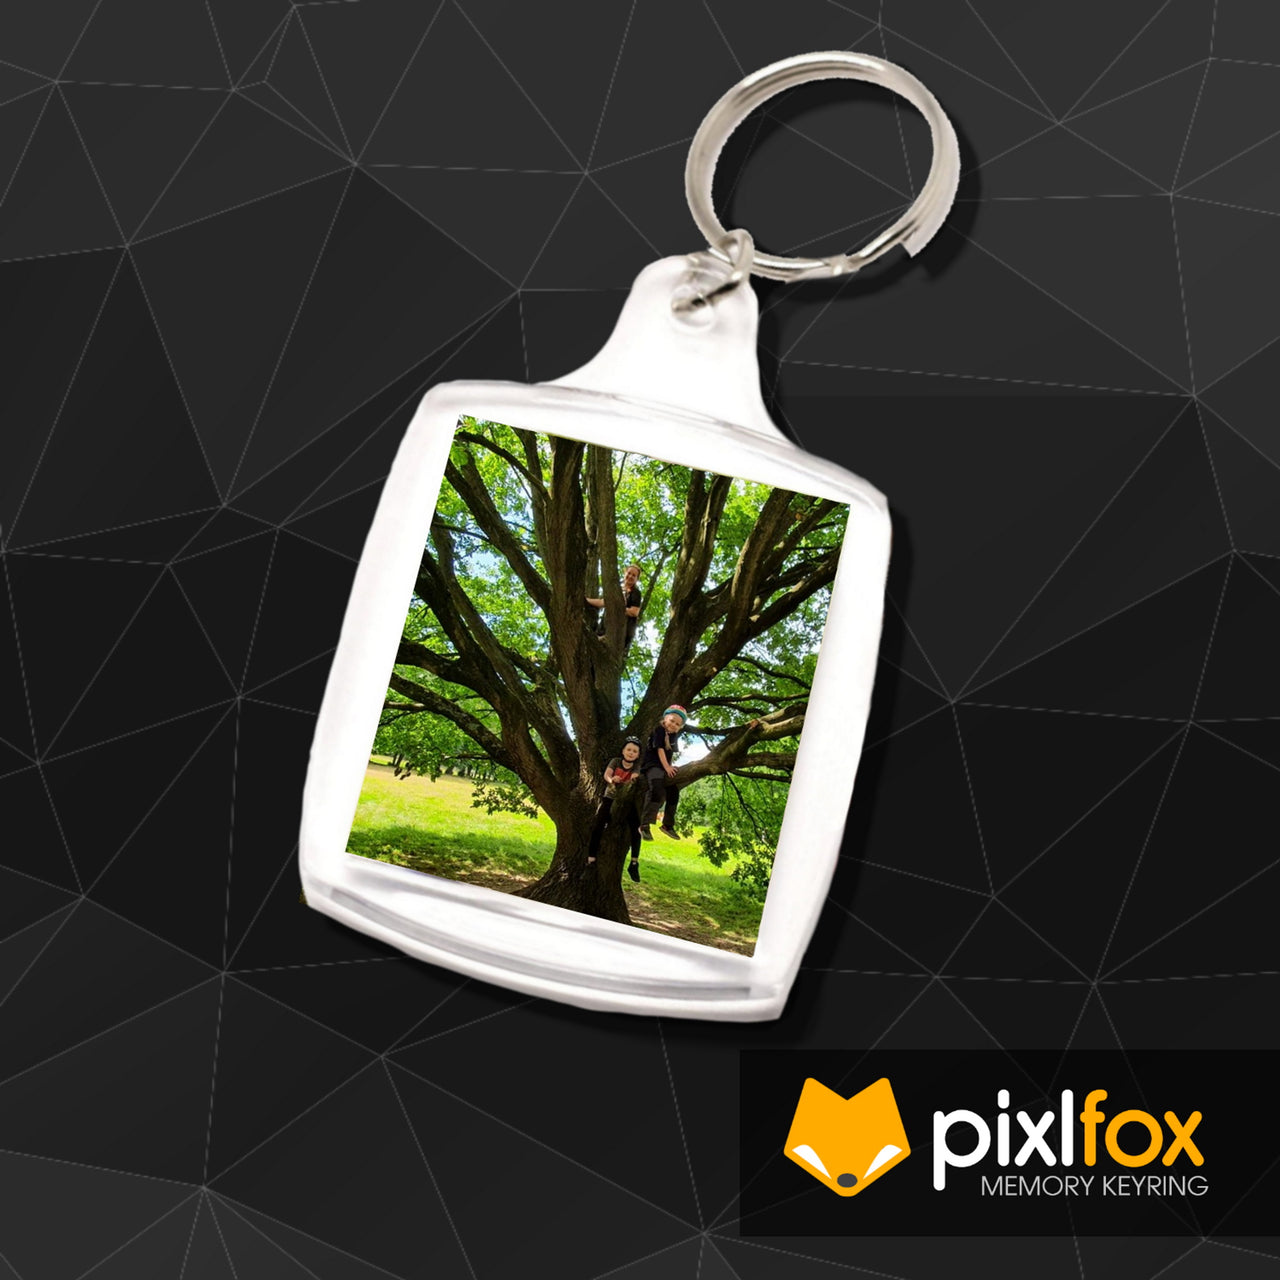 Custom Printed Photo Keyring 45 x 35mm | Buy Additional Keyrings from only 2.50 each!